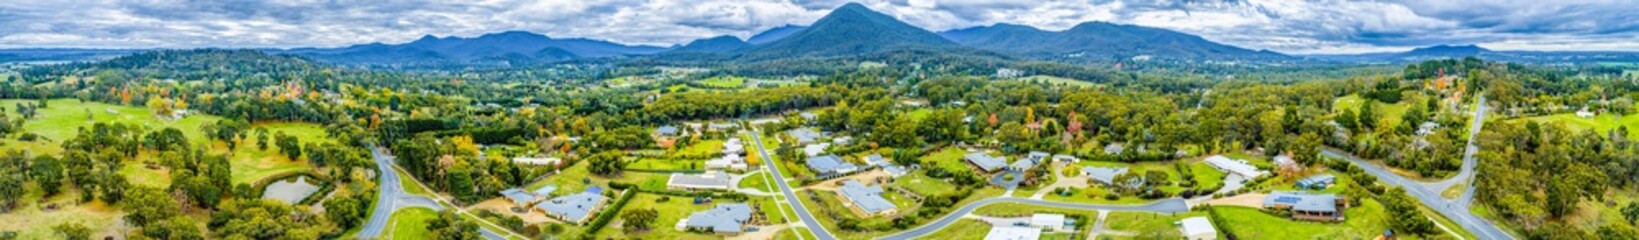 Wide aerial panorama of scenic countryside with houses surrounded by forest and mountains. Healesville, Victoria, Australia